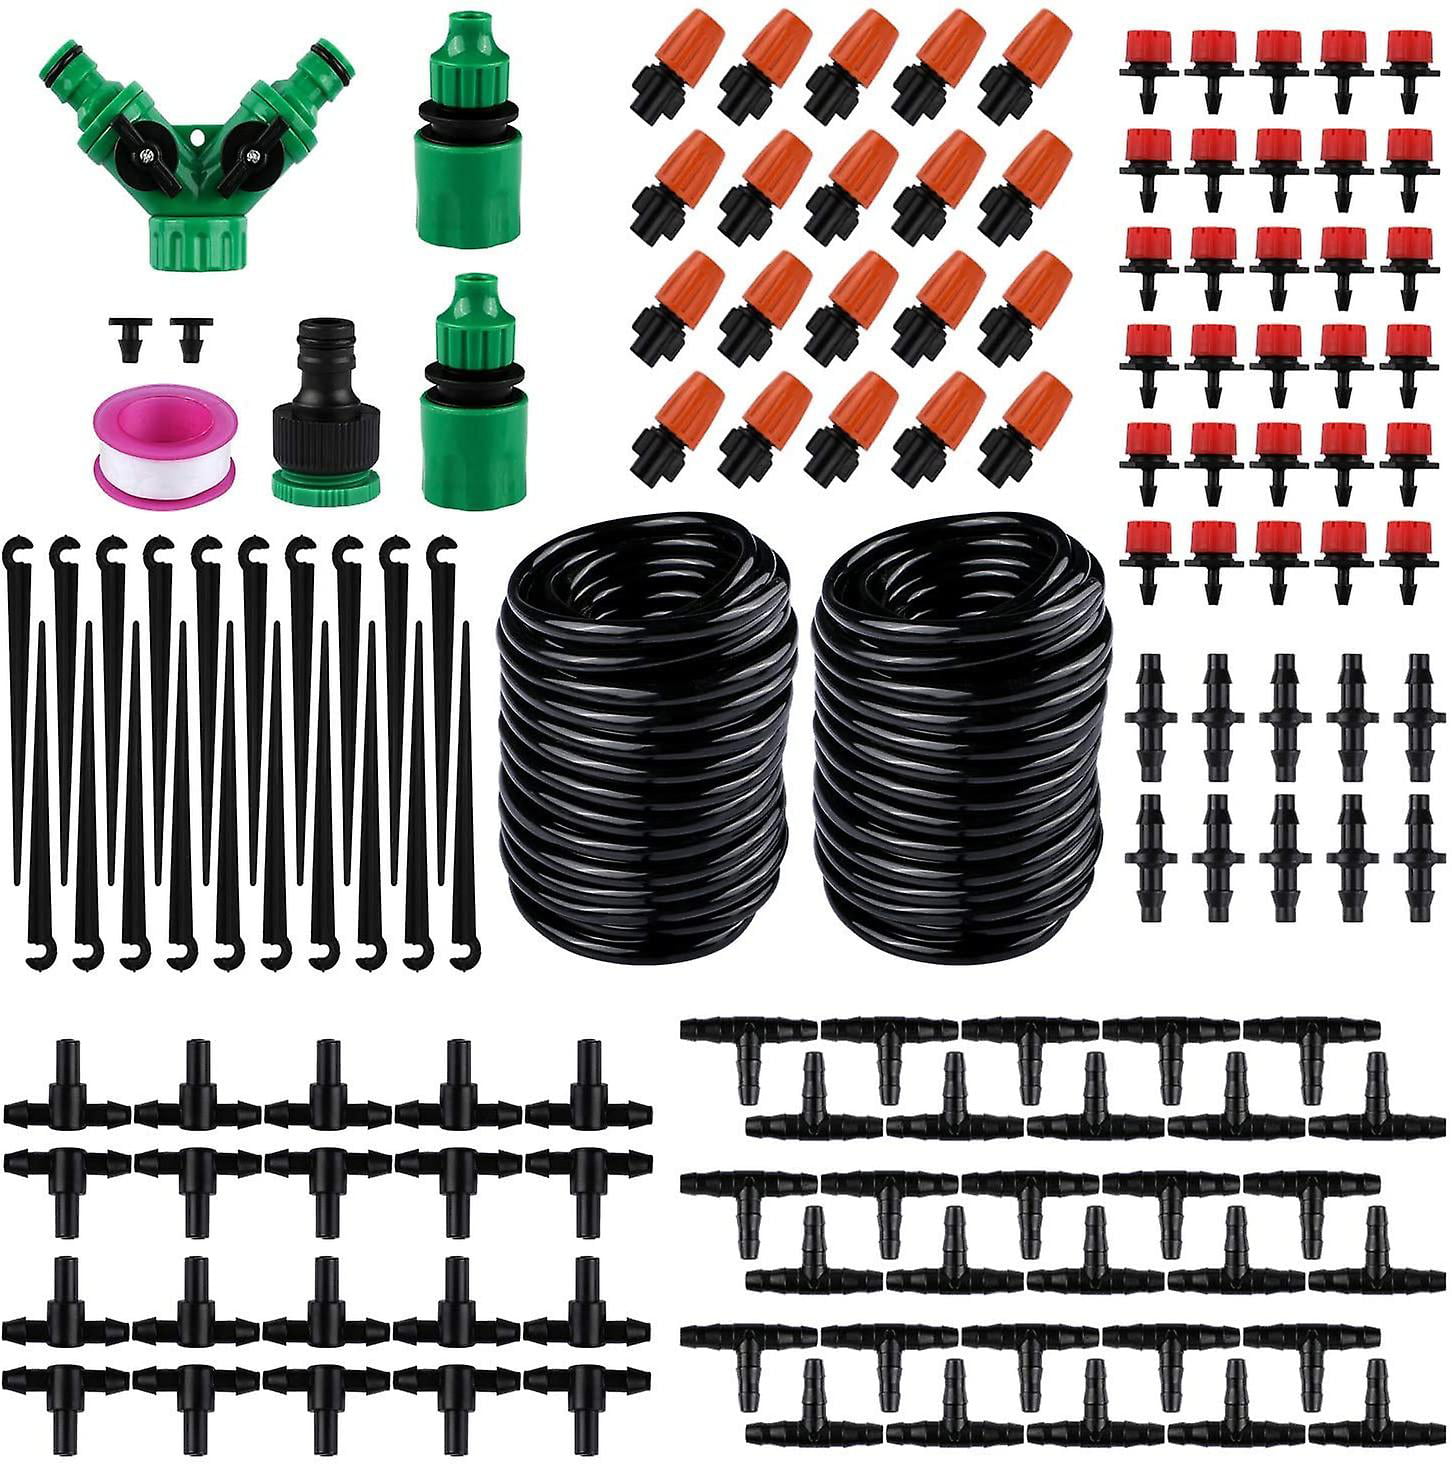 100 Ft Adjustable Garden Automatic Irrigation System Kits W/ DIY Plant NEW 